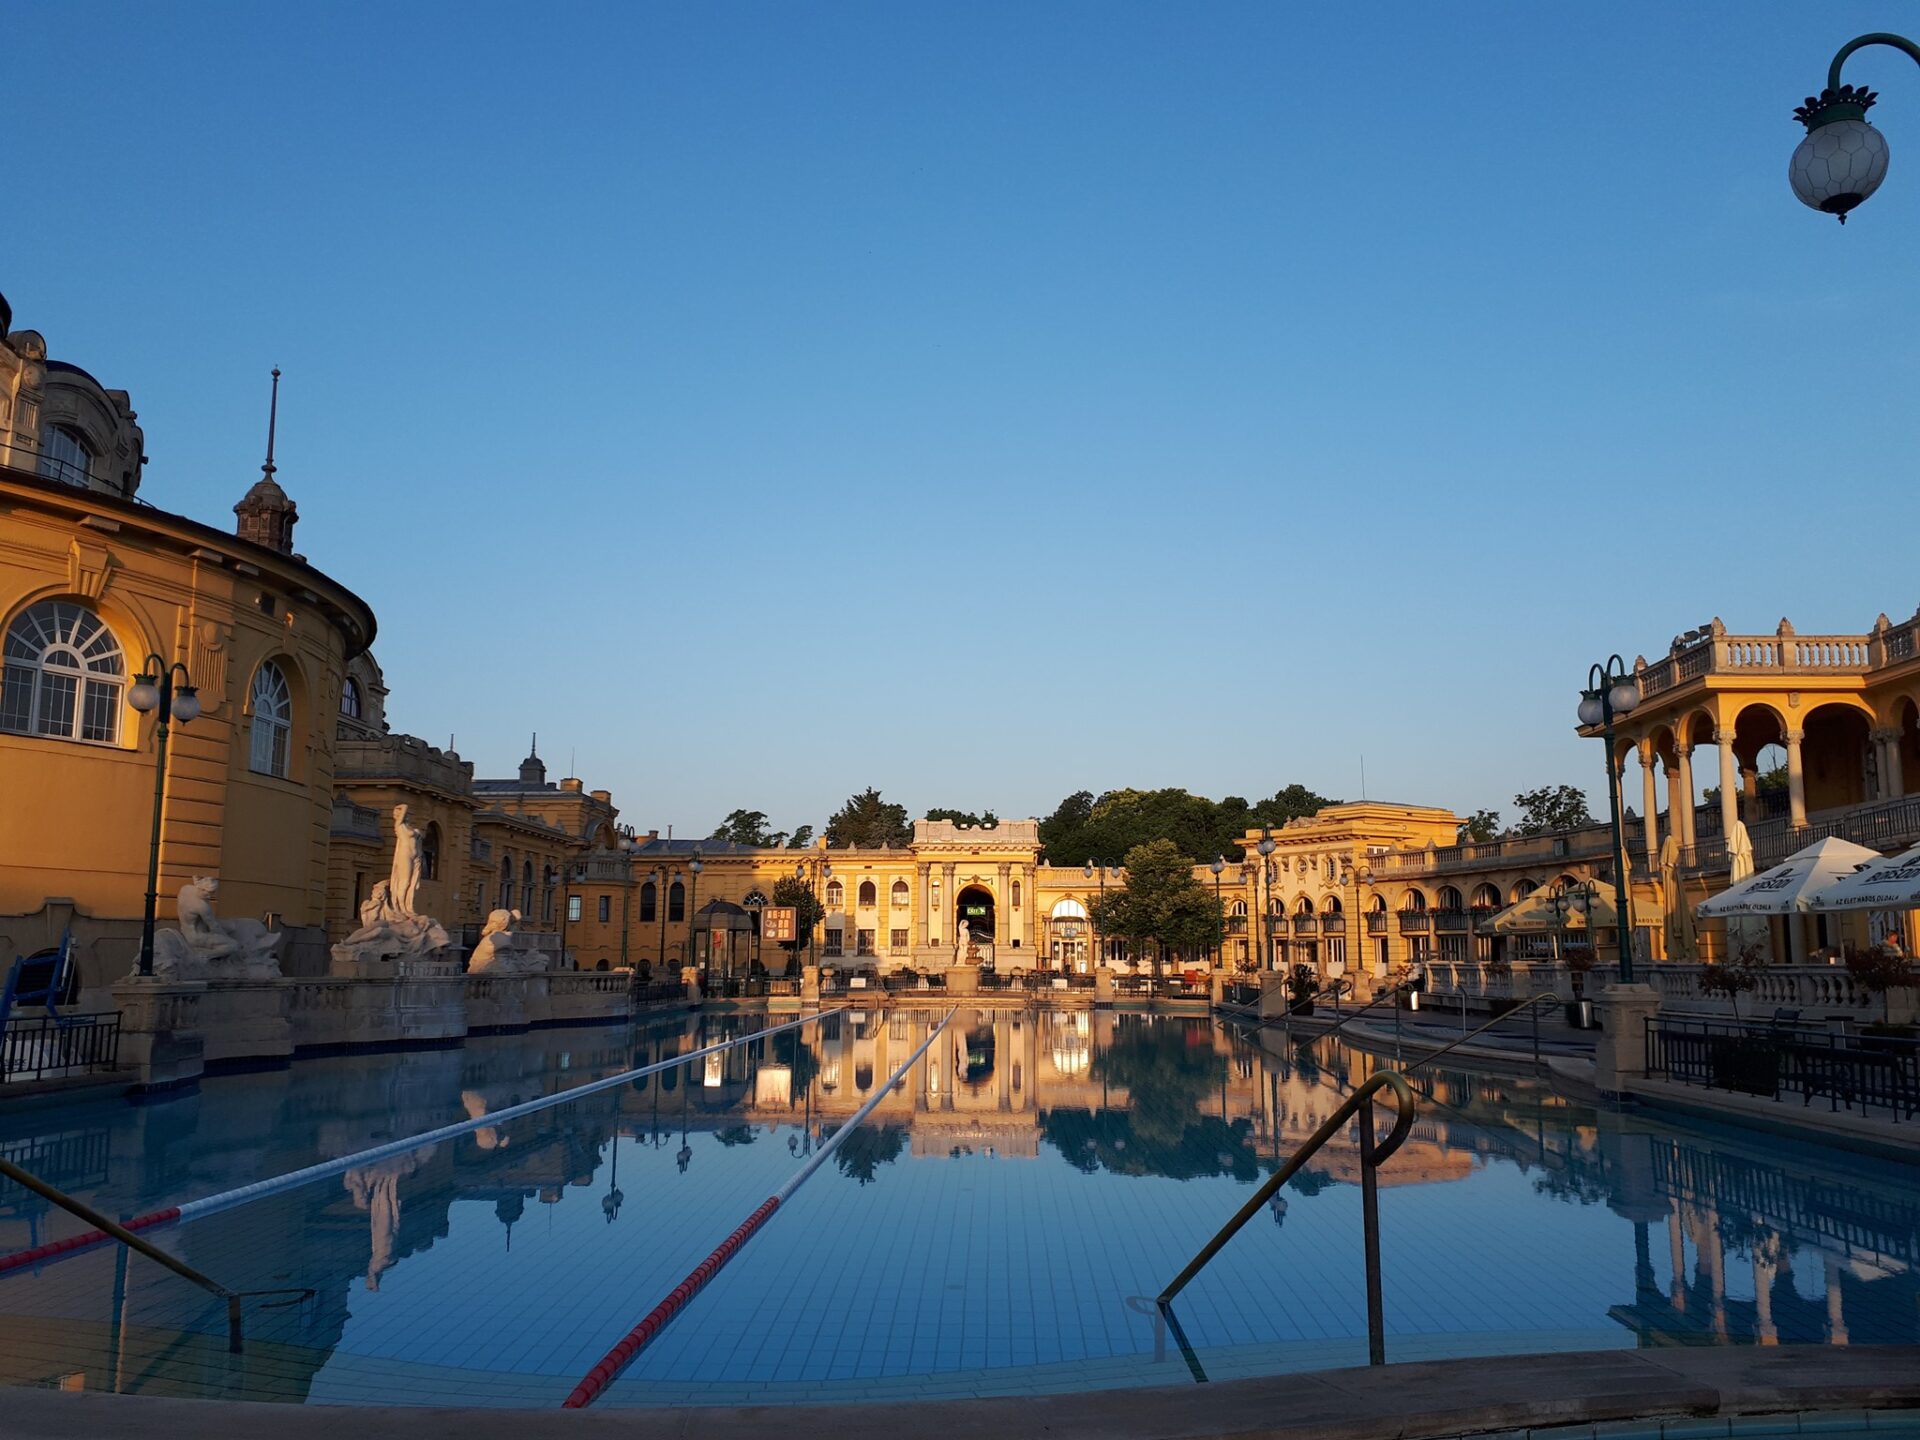 The outdoor pools of Széchenyi Bath